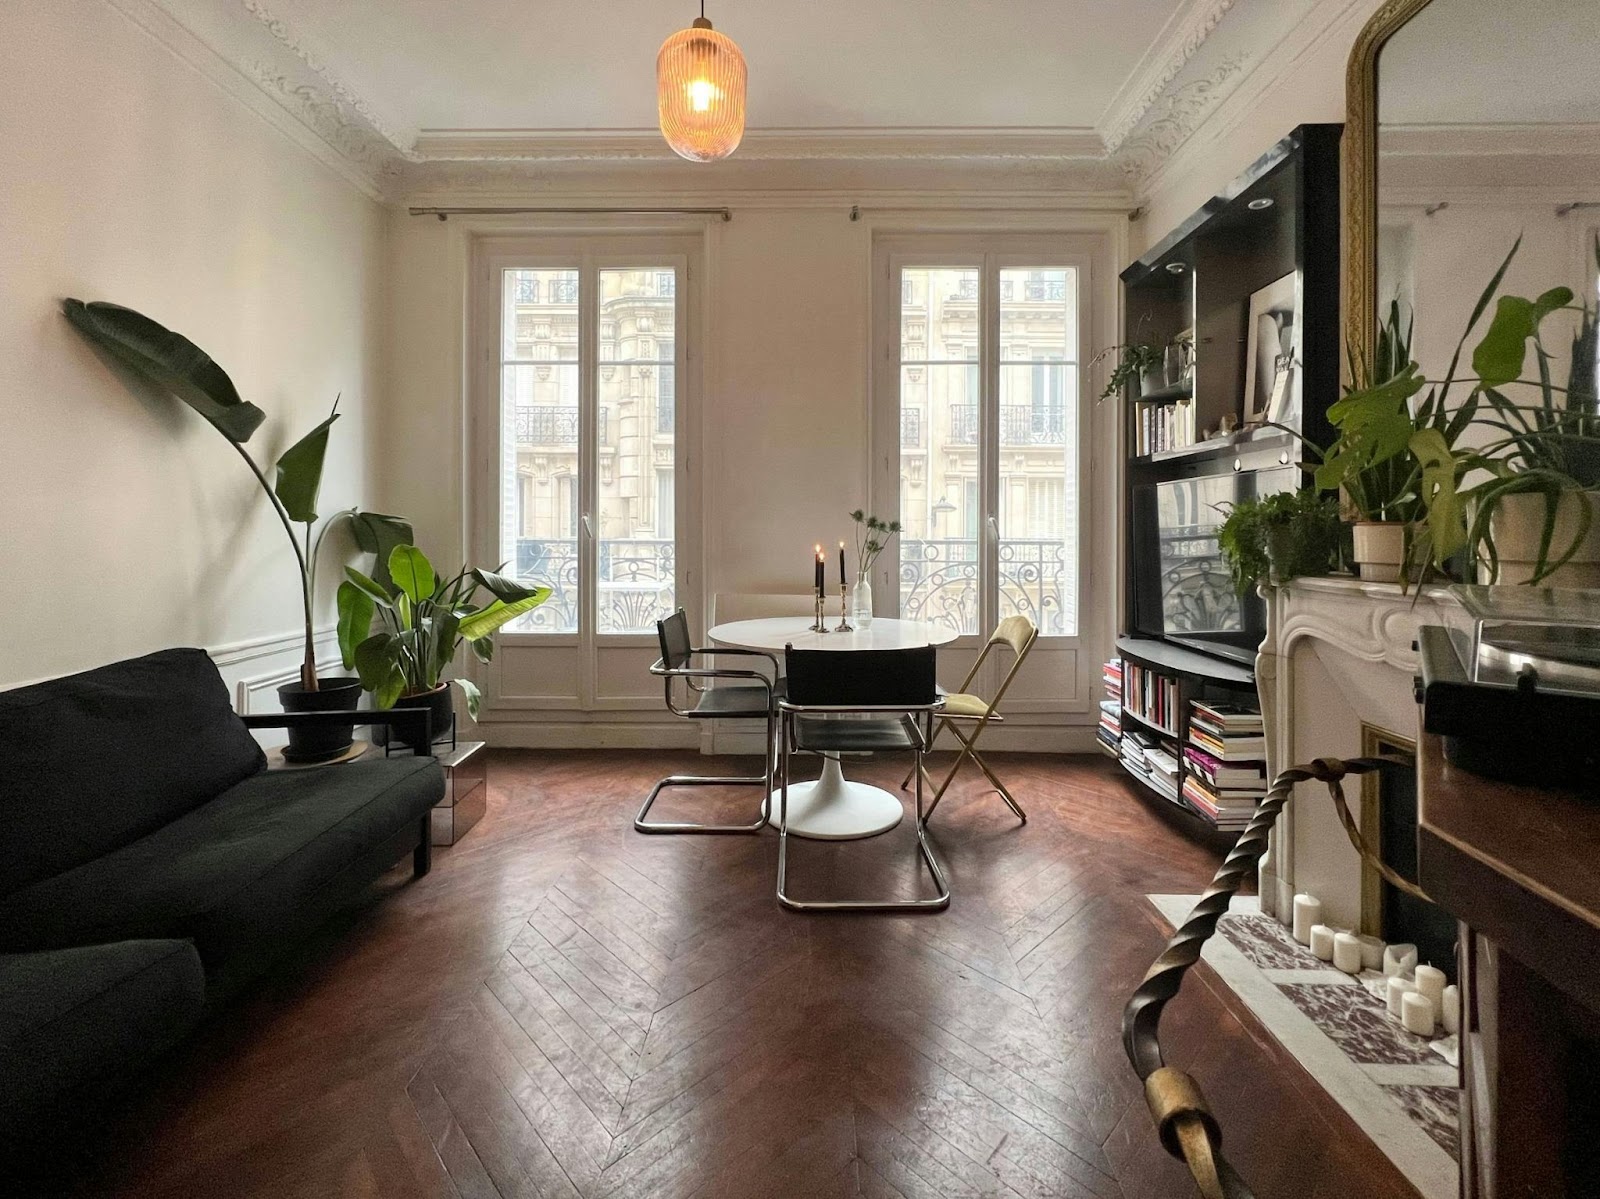 Kindred member home in the heart of Paris, France